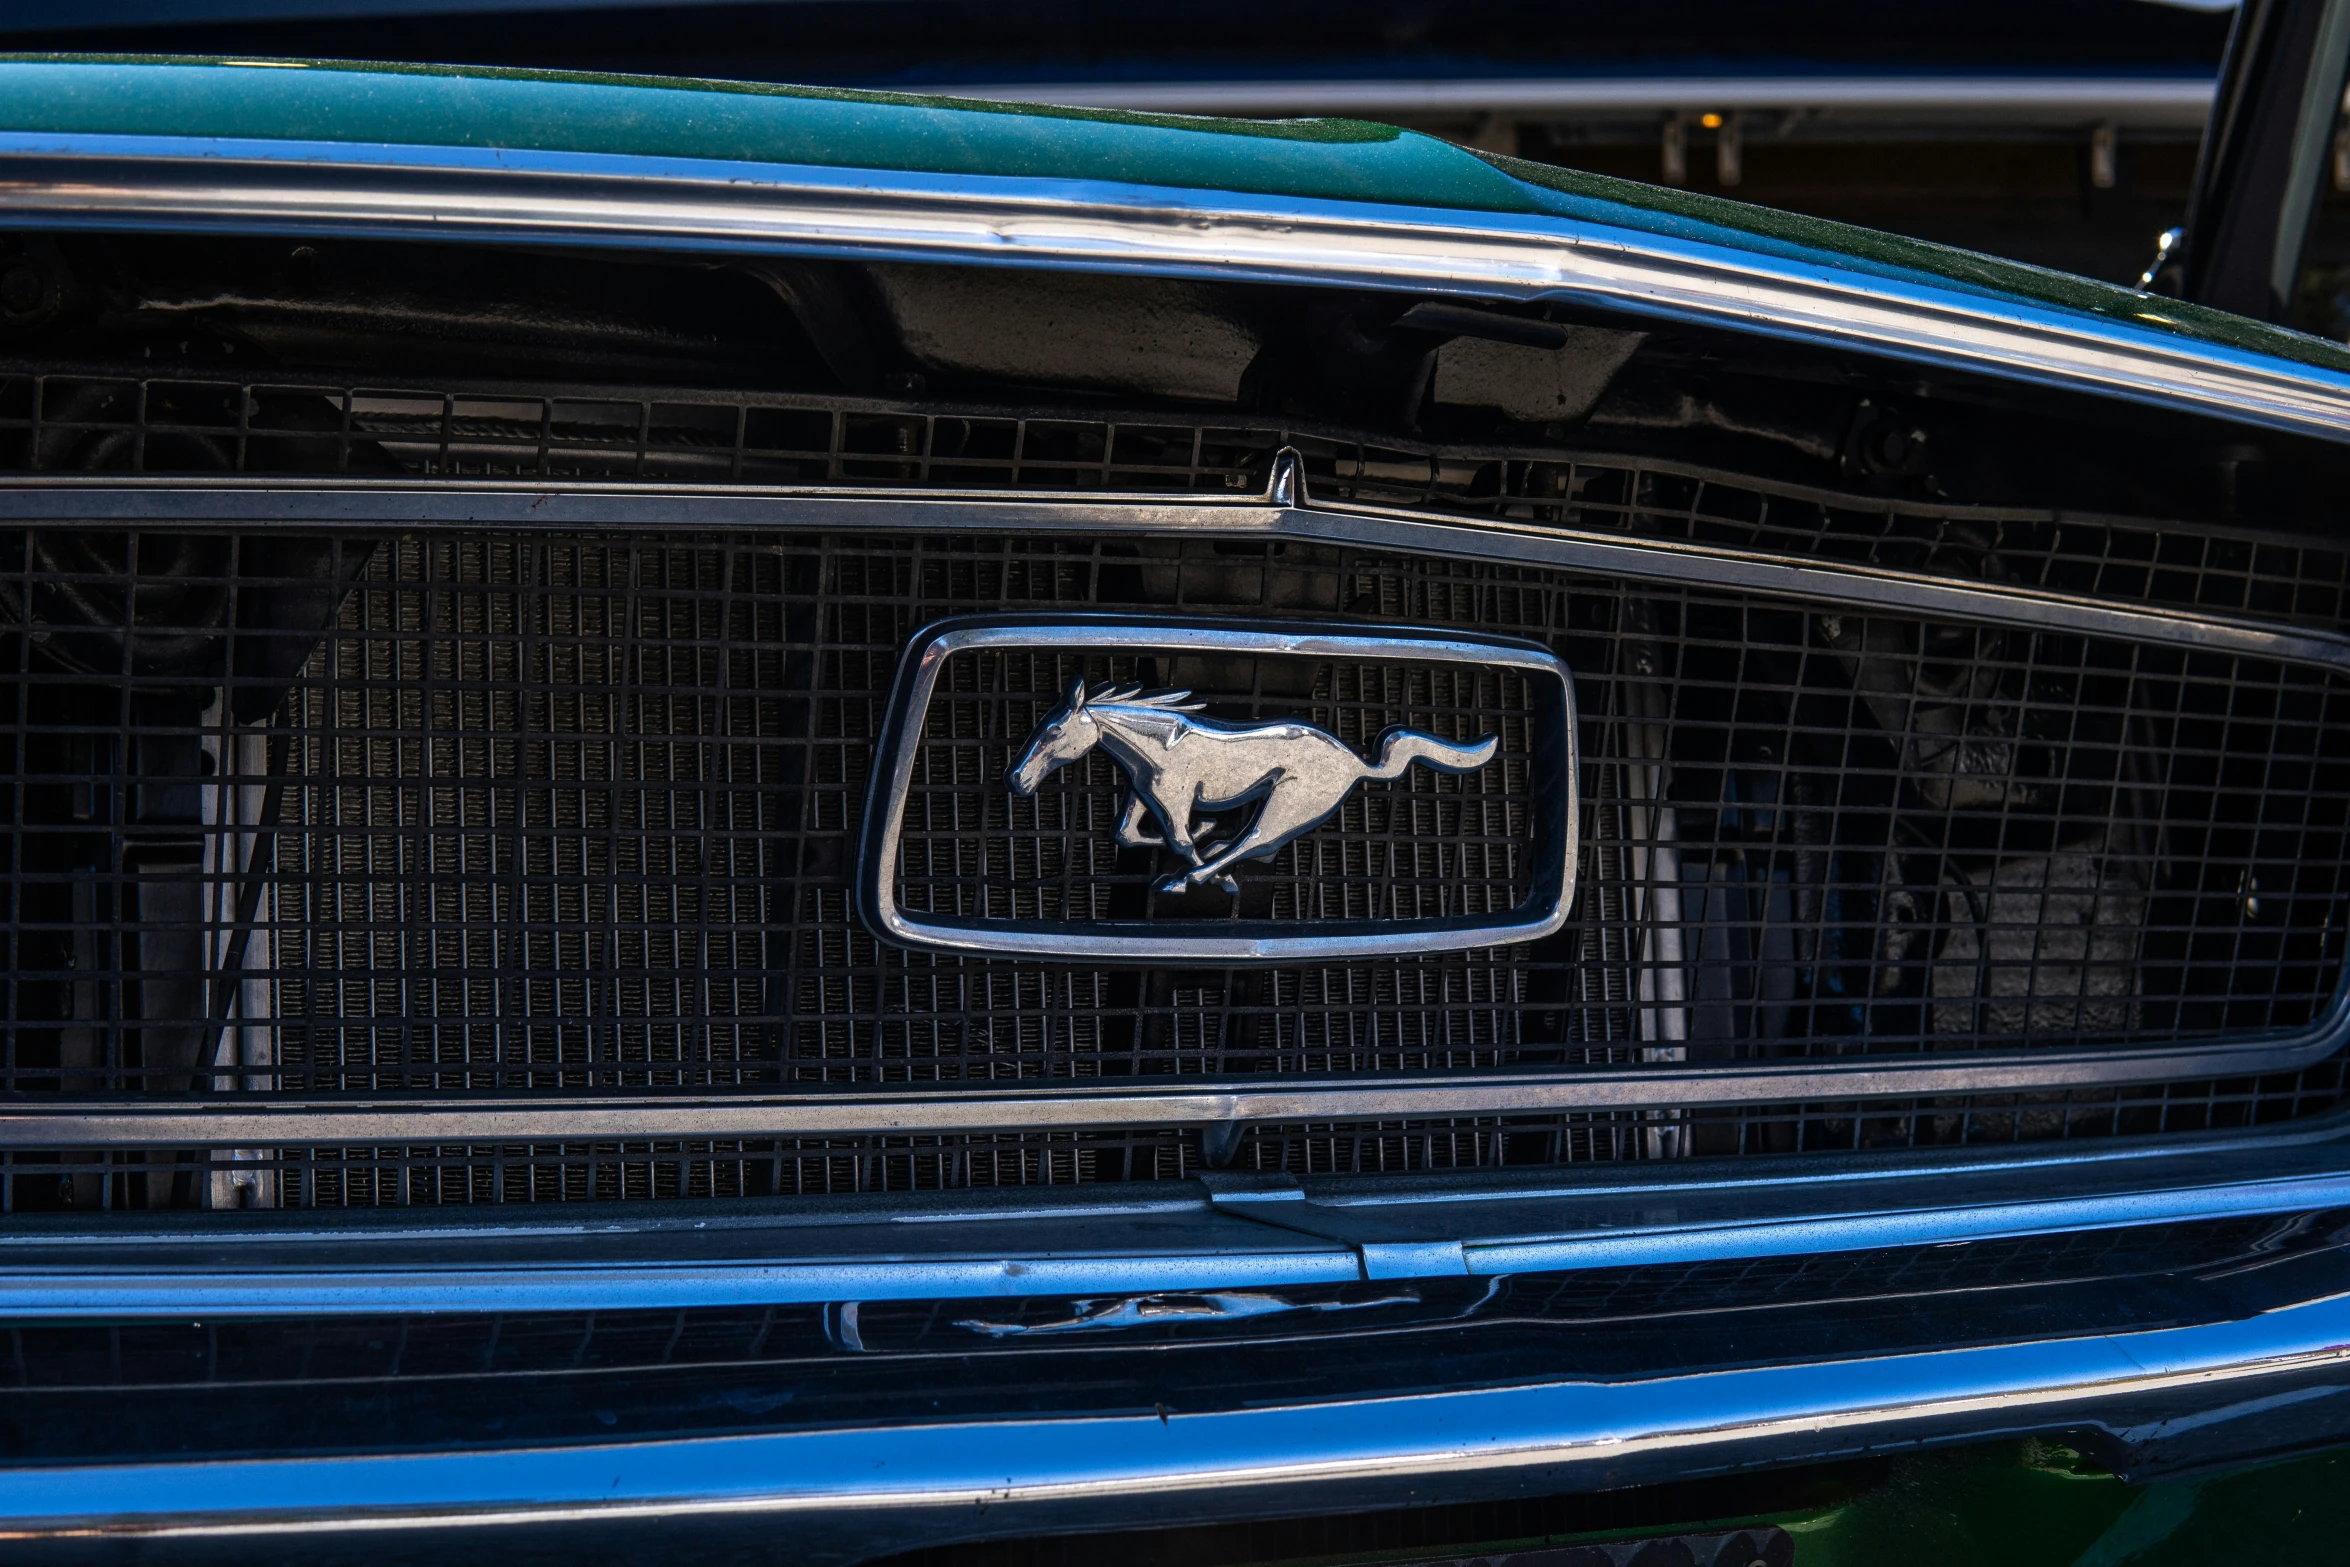 a green car with a horse emblem on the grille